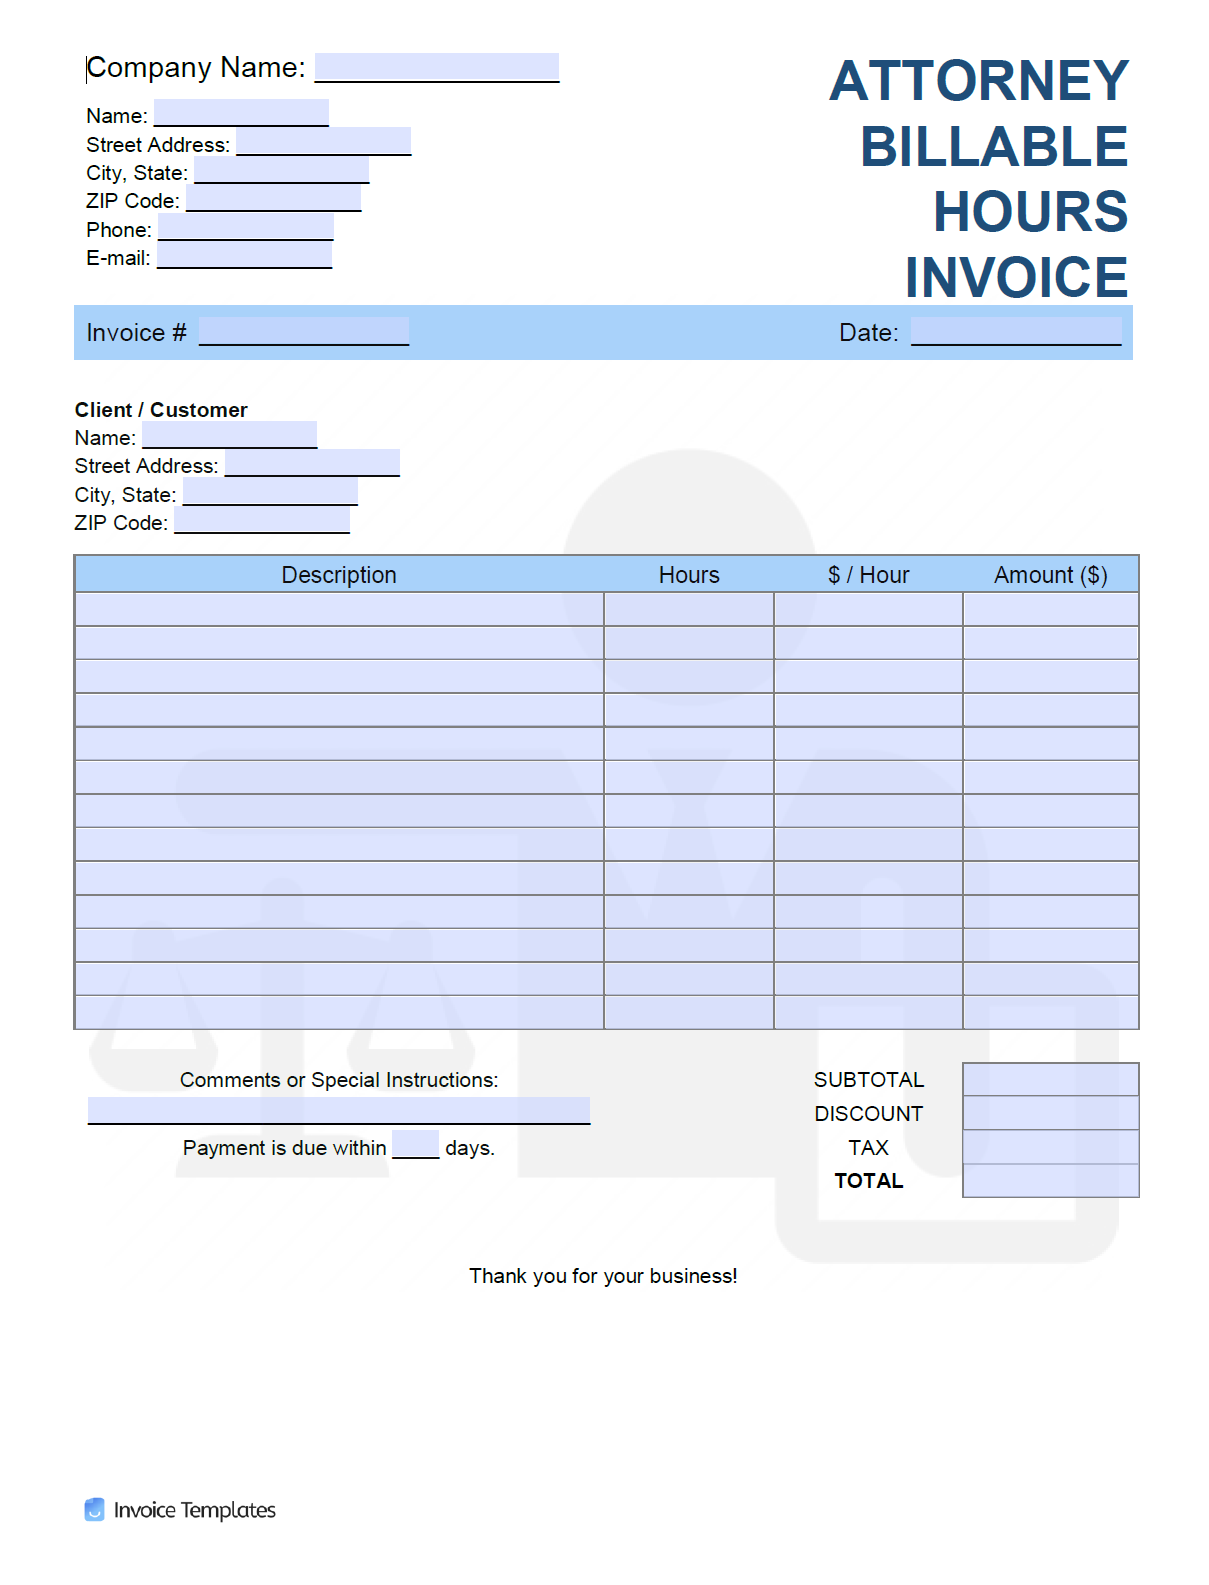 Free Attorney Billable Hours Hr Invoice Template Pdf Word Excel